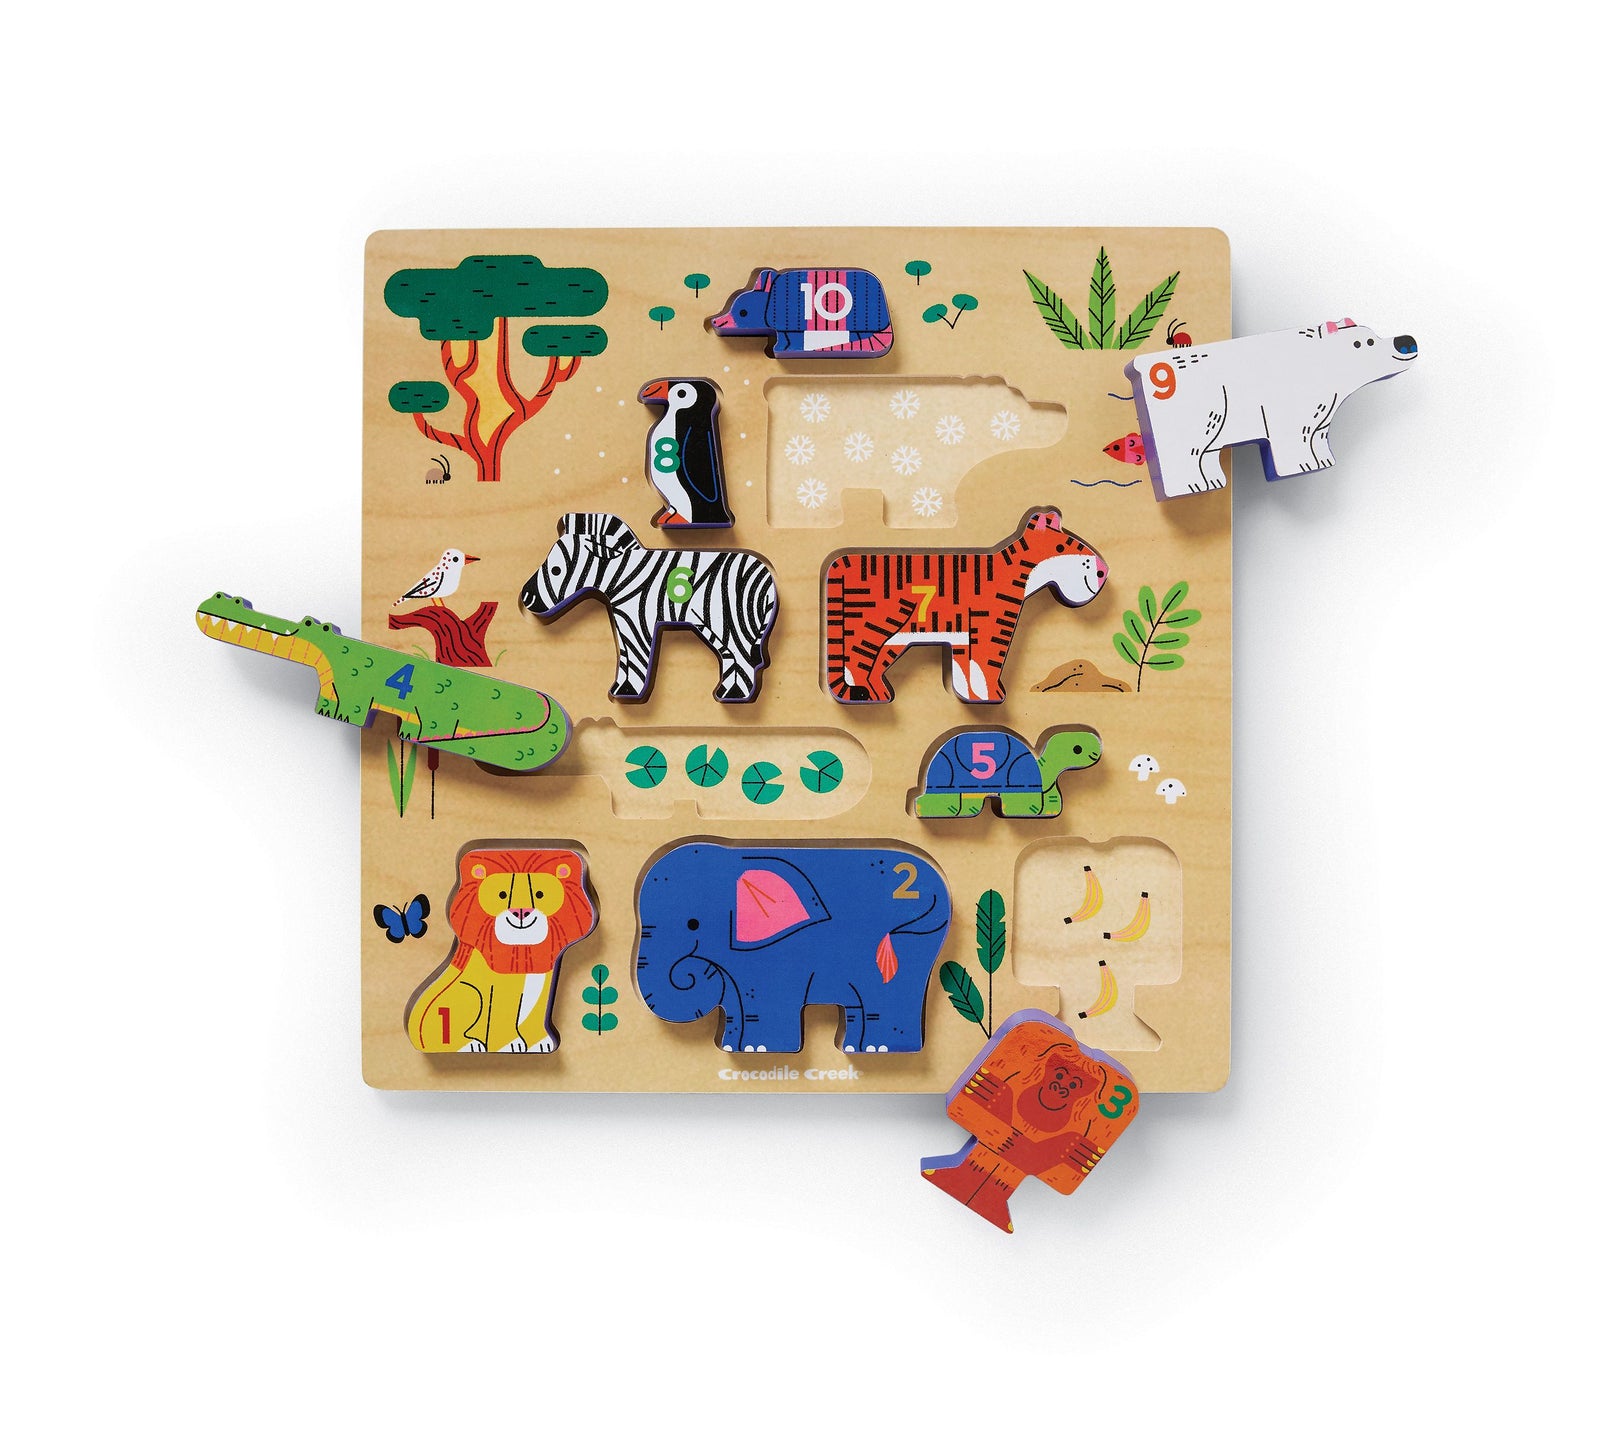 10-Piece Stacking Wood Puzzle - 123 Zoo